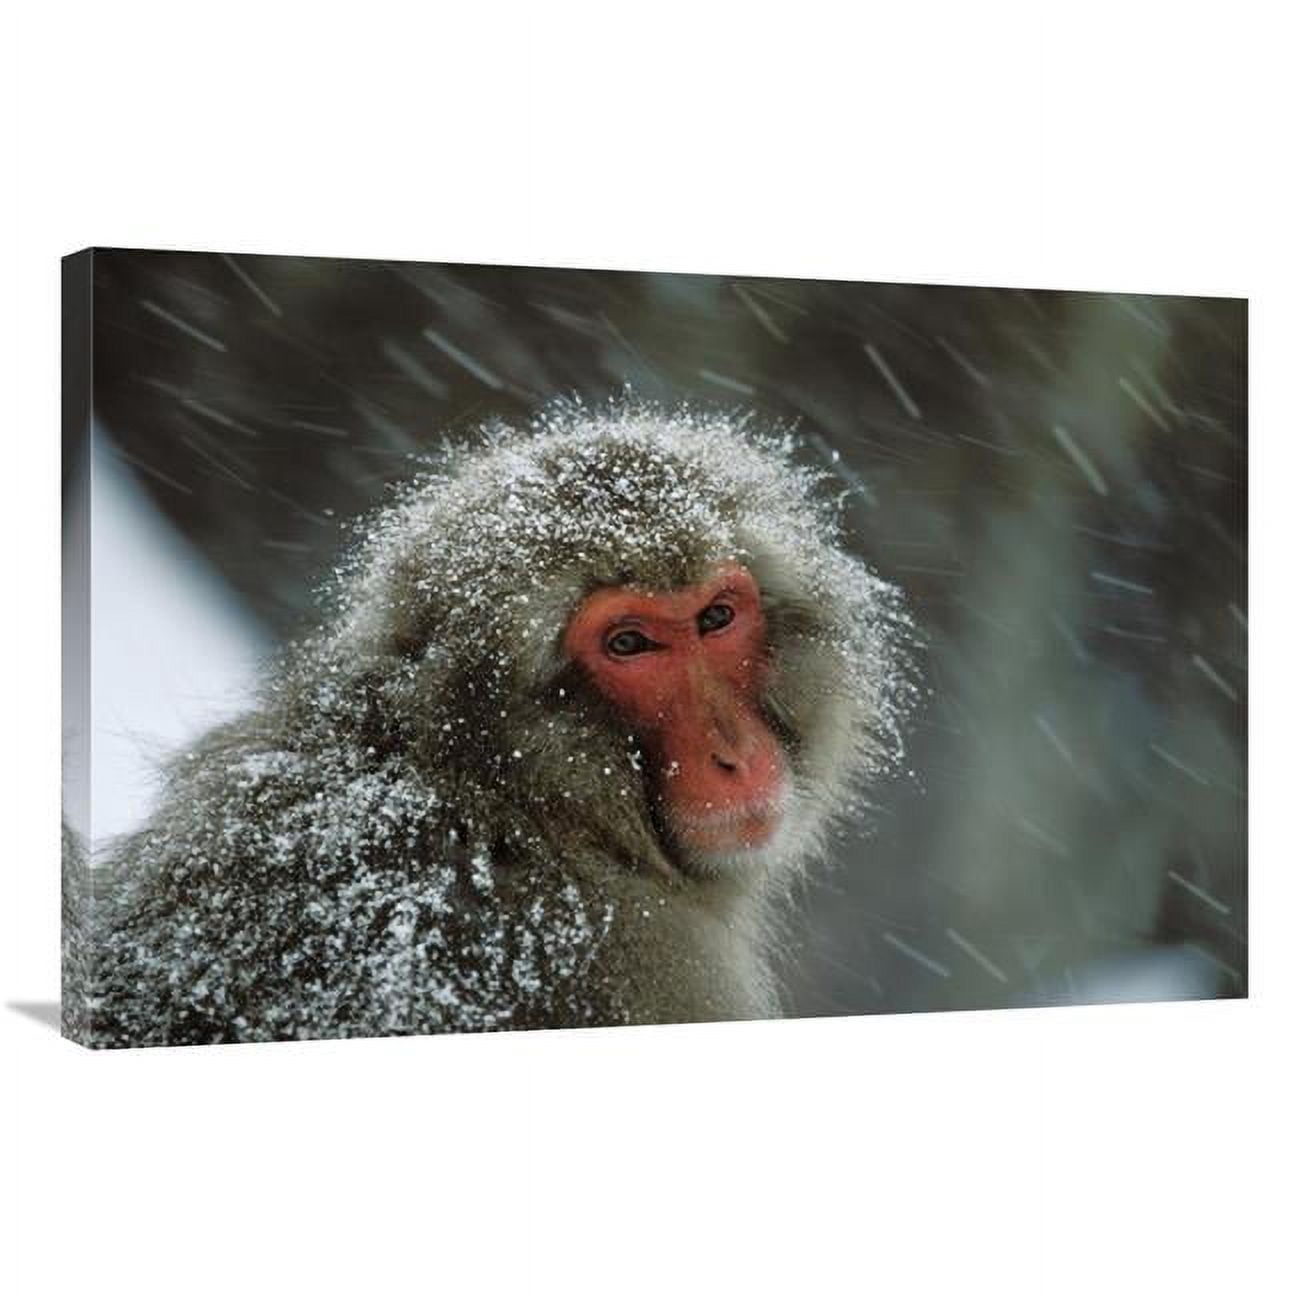 JensenDistributionServices 24 x 36 in. Japanese Macaque Covered in Snow, Japanese Alps Near Nagano, Japan Art Print - Konrad Wothe